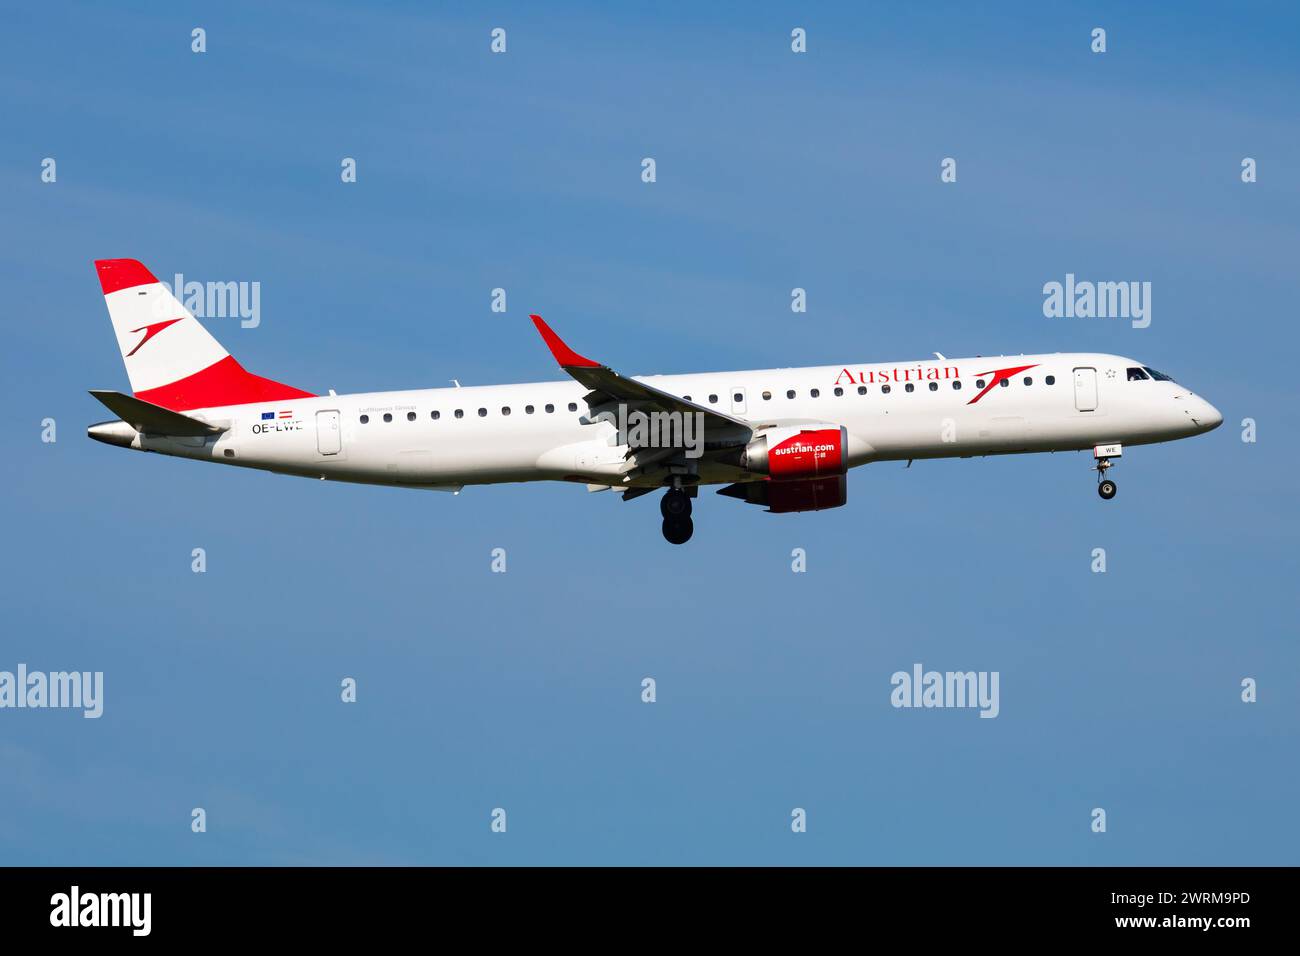 Vienna, Austria - May 20, 2018: Austrian Airlines Embraer ERJ-195 OE-LWE passenger plane arrival and landing at Vienna Airport Stock Photo